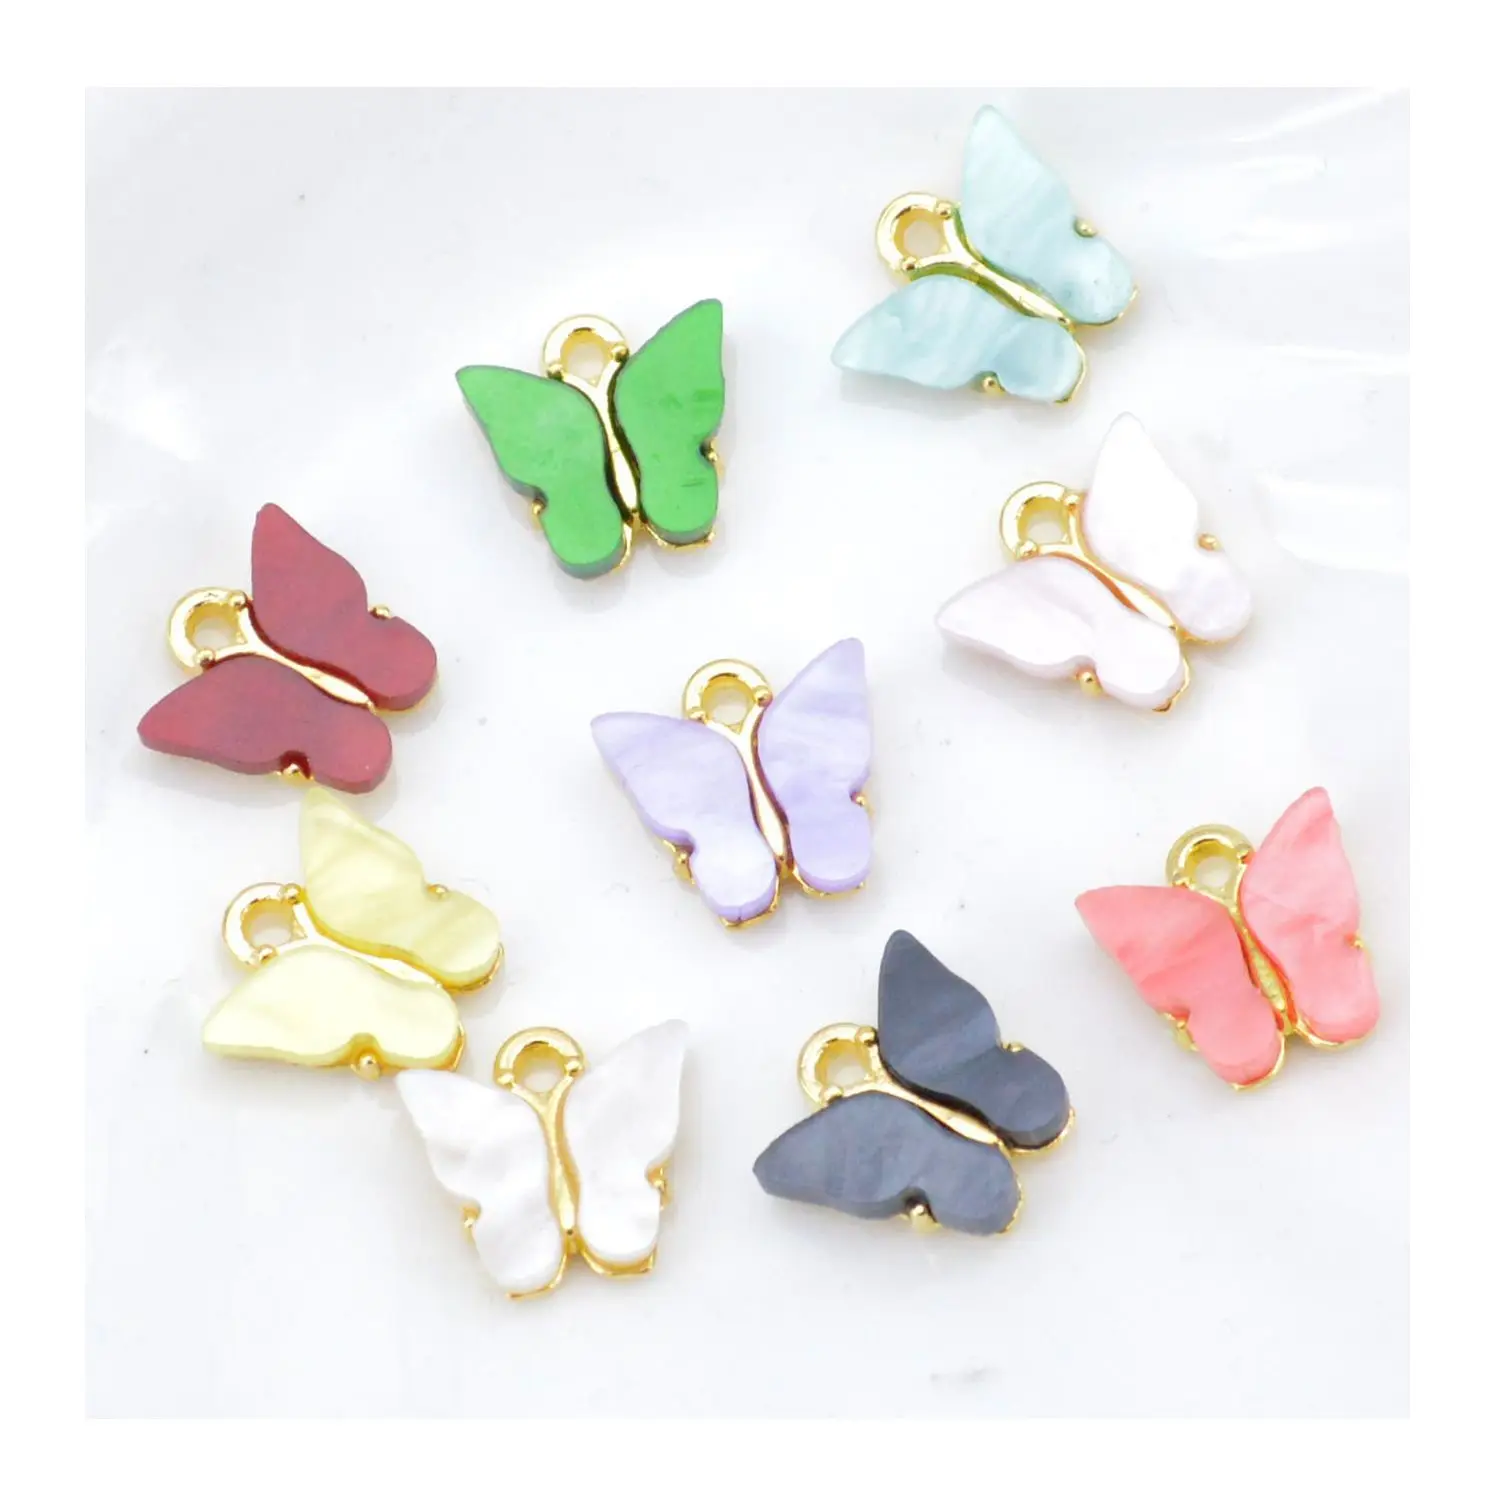 100Pcs/Bag Colorful Acrylic Butterfly Connector Charms Pendants Dangles For Earring Necklace Bracelet Jewelry Making Accessories